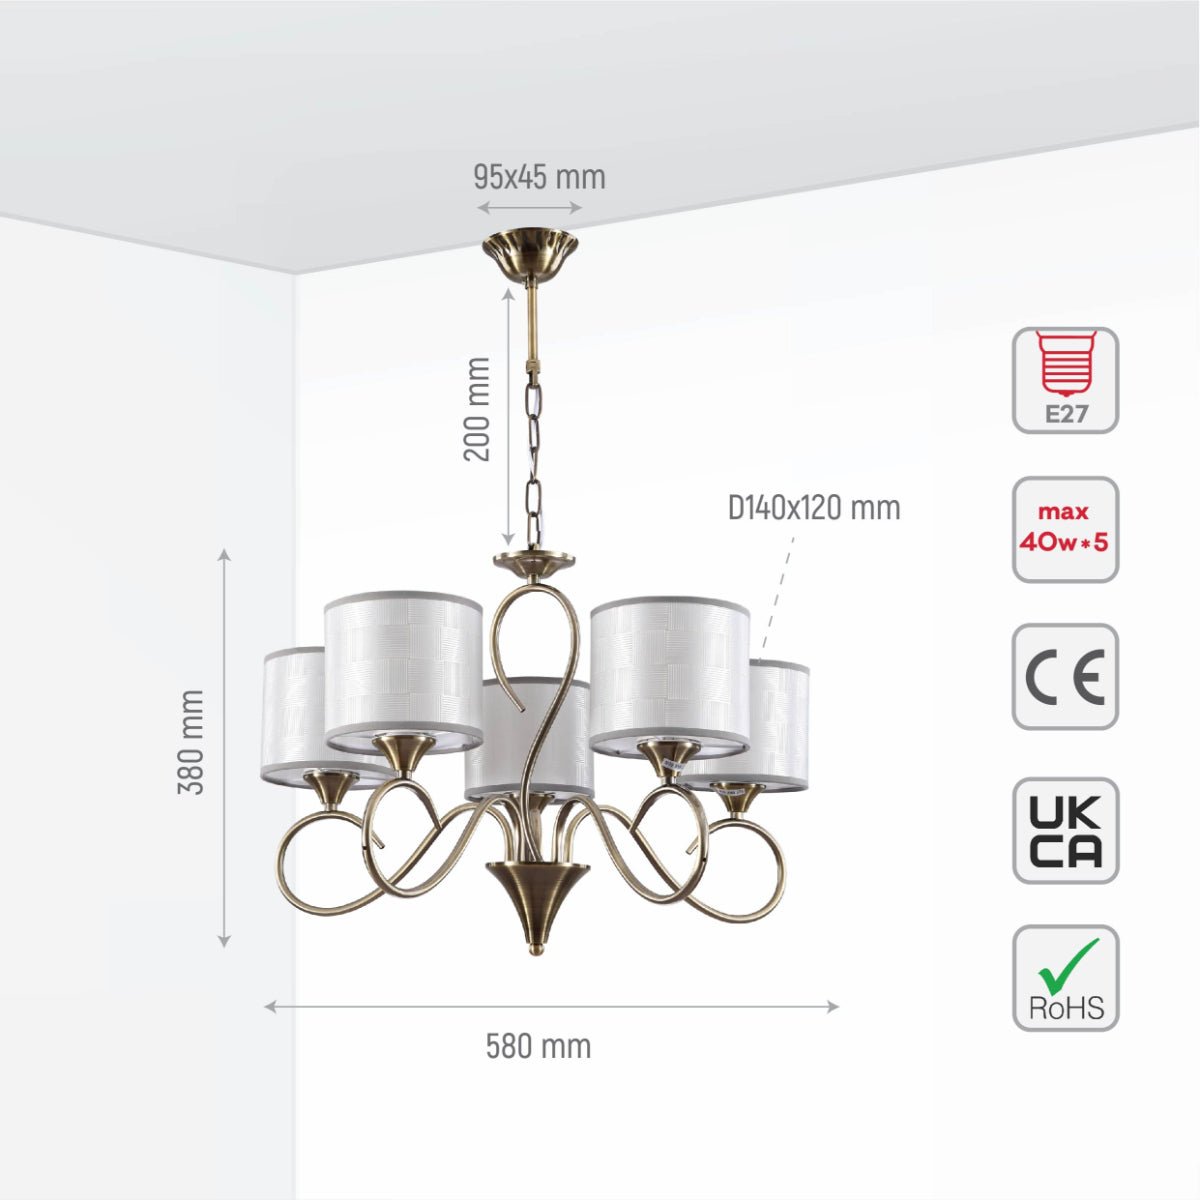 Size and specs of Antique Brass Arm Grey Cylinder Shaded Candle Vintage Chandelier Ceiling Light with E27 Fittings | TEKLED 159-17704